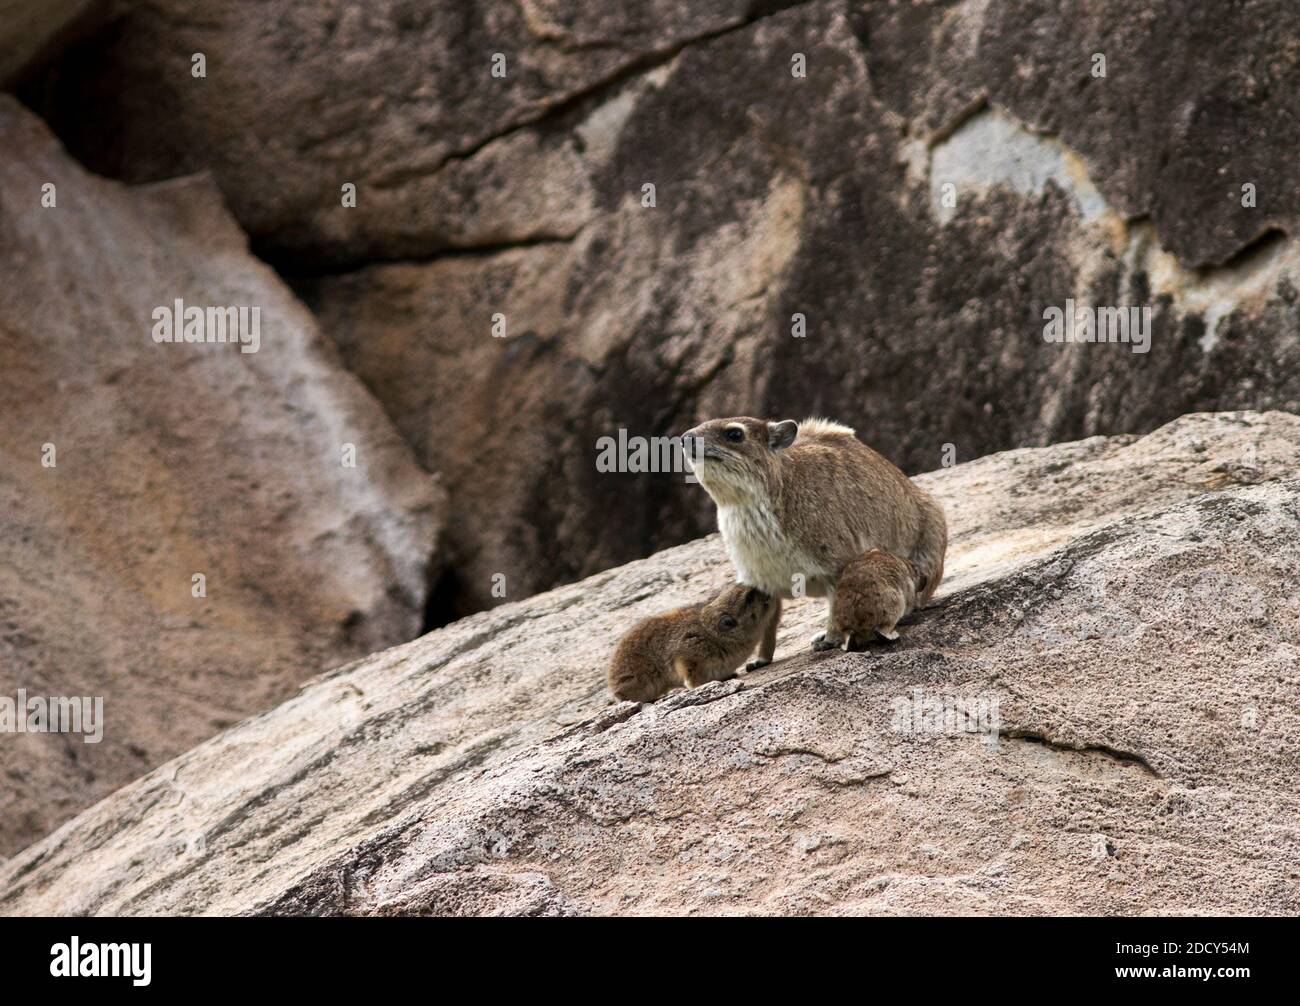 Bush Hyrax are equally at home on rocky outcrops as they are finding food high up in the tree canopies. In some areas they will share rock crevasse Stock Photo